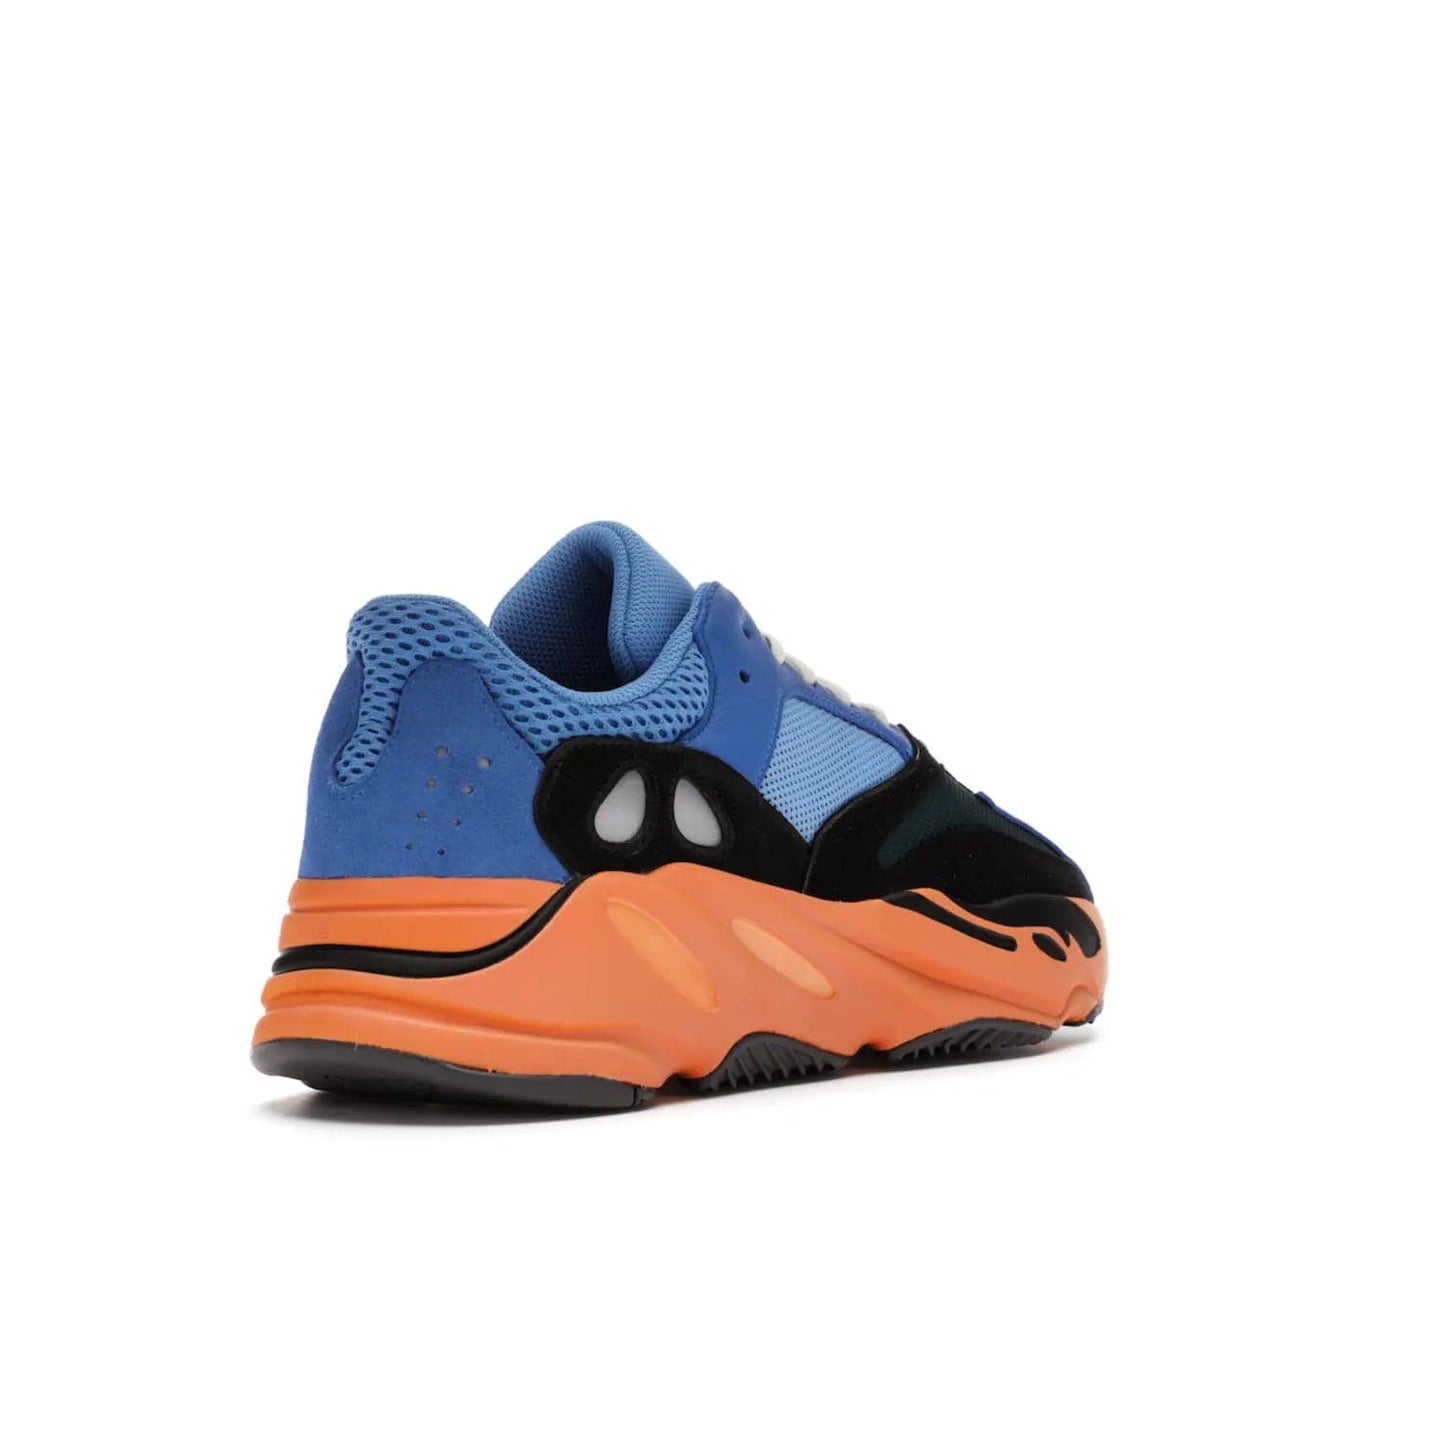 adidas Yeezy Boost 700 Bright Blue - Image 32 - Only at www.BallersClubKickz.com - Iconic sneaker style meets vibrant colour with the adidas Yeezy Boost 700 Bright Blue. Reflective accents, turquoise and teal panels, bright orange midsole and black outsole make for a bold release. April 2021.